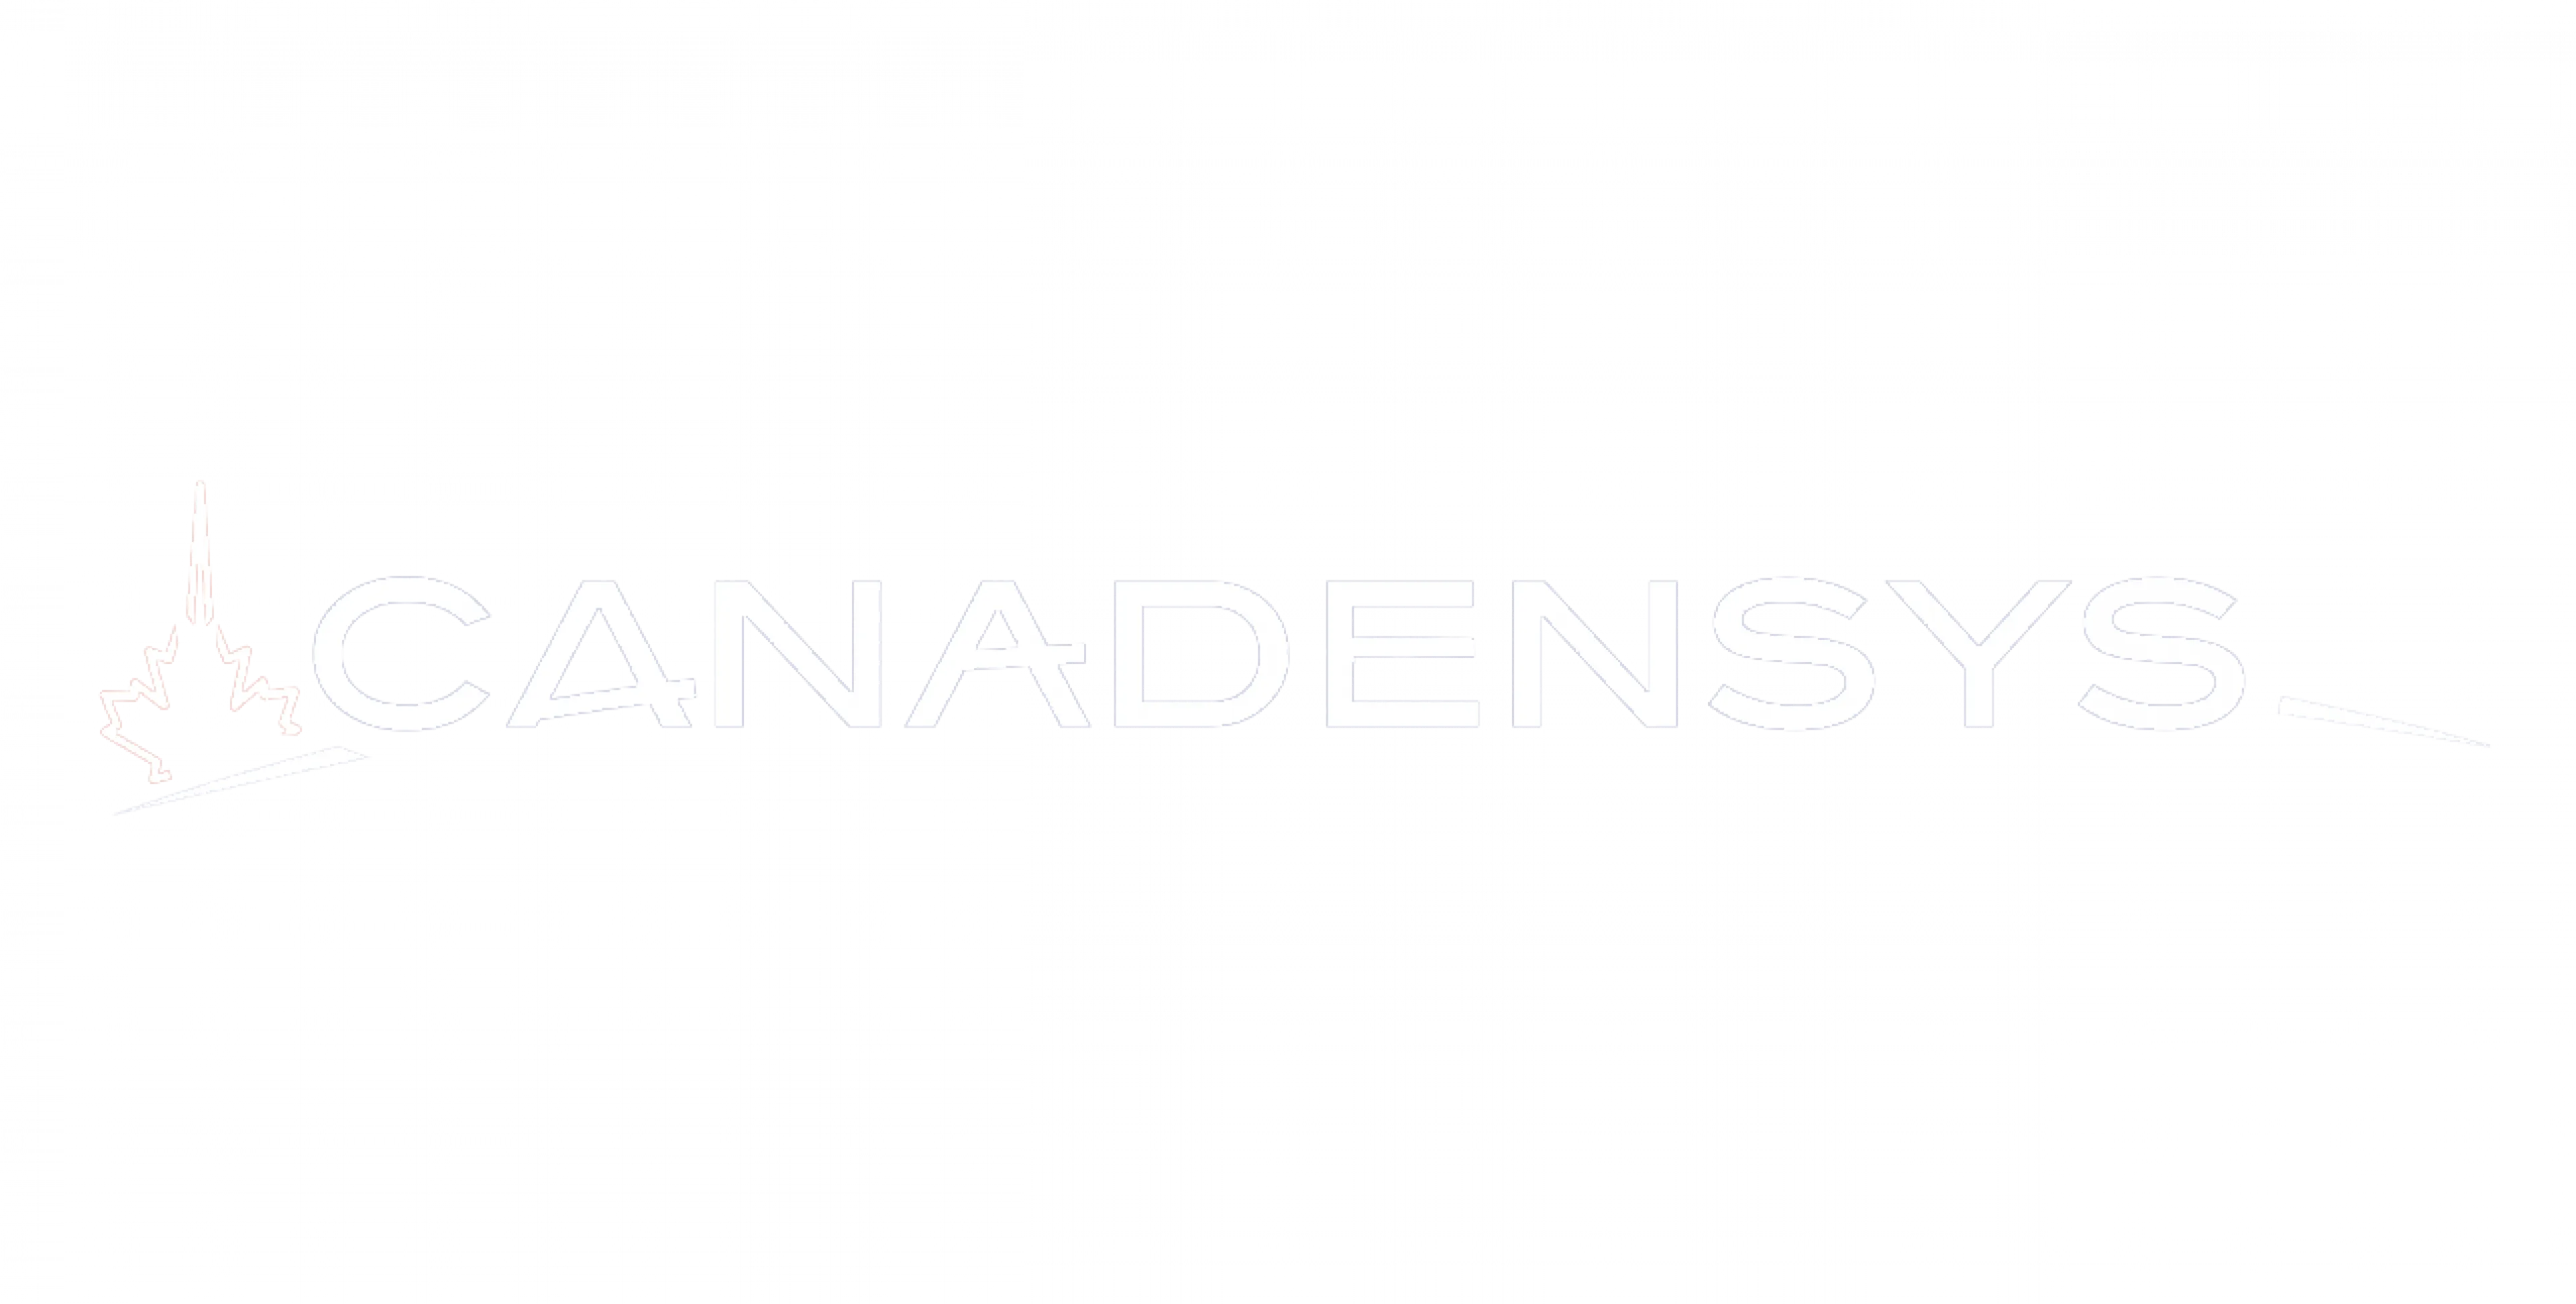 Canadensys